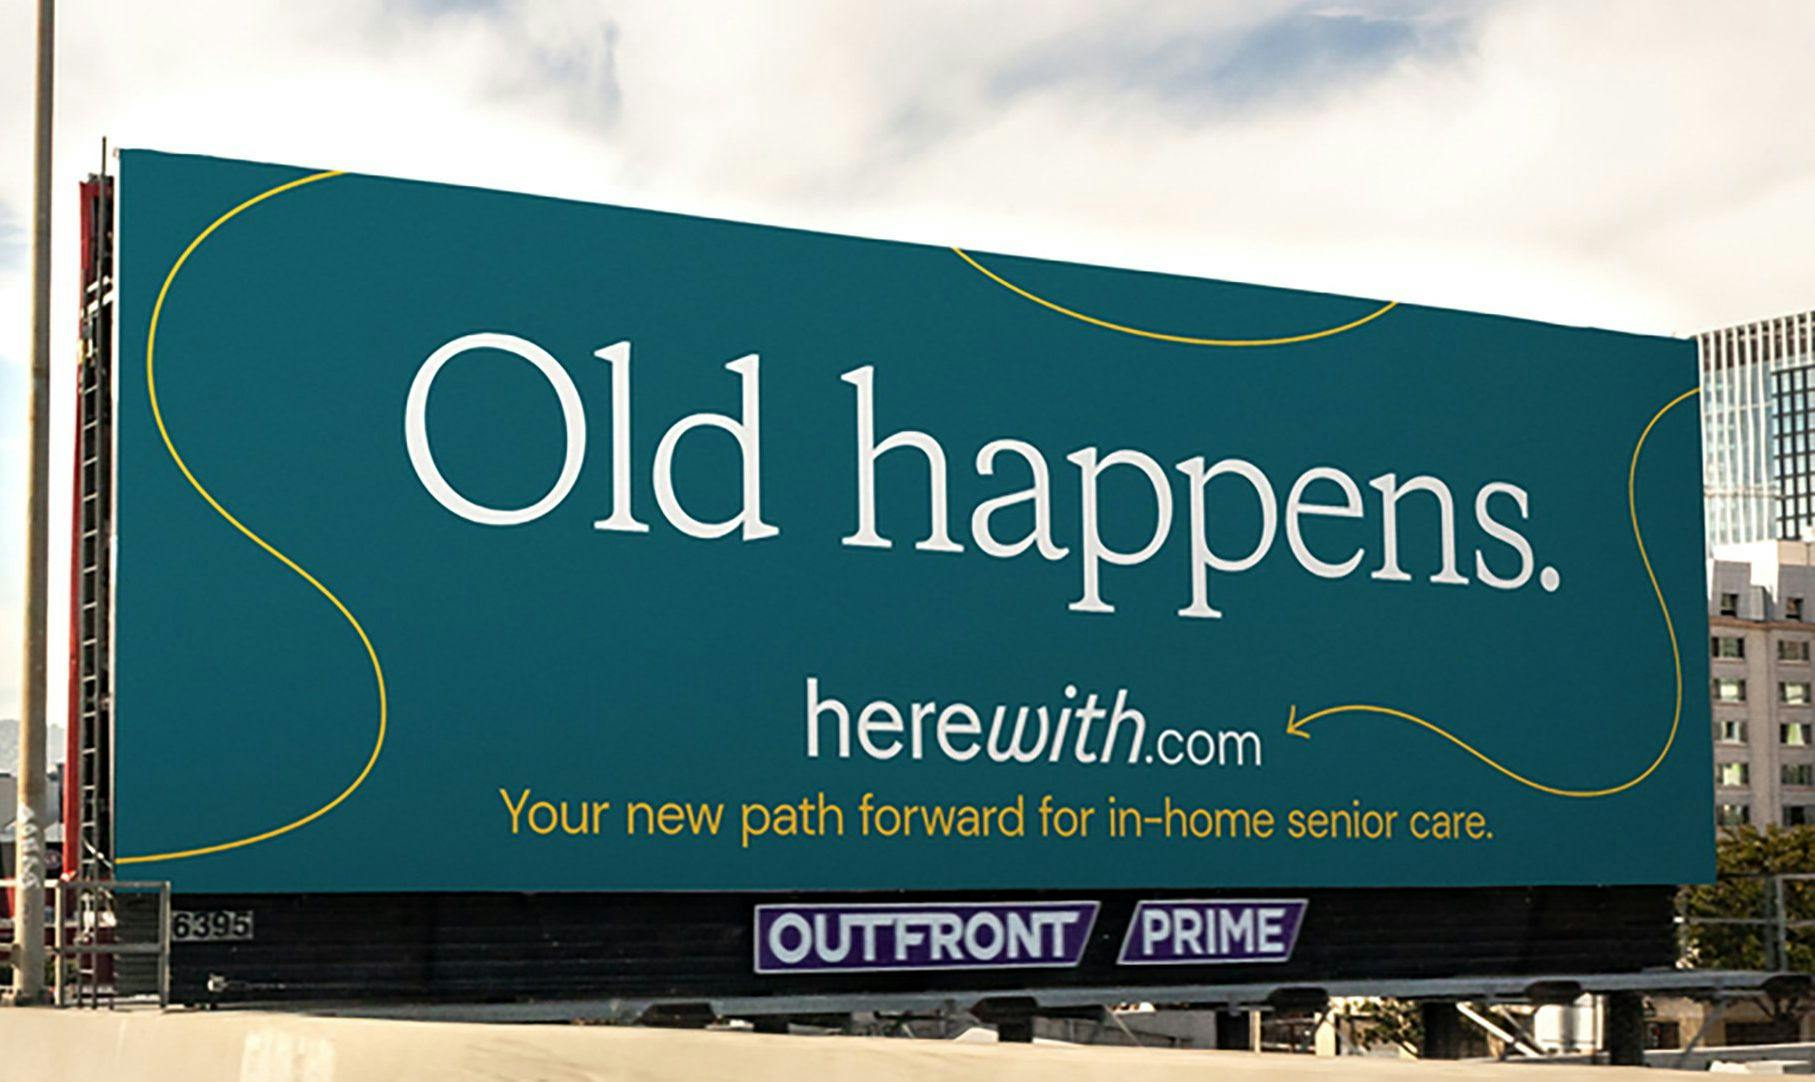 Old happens billboard for herewith